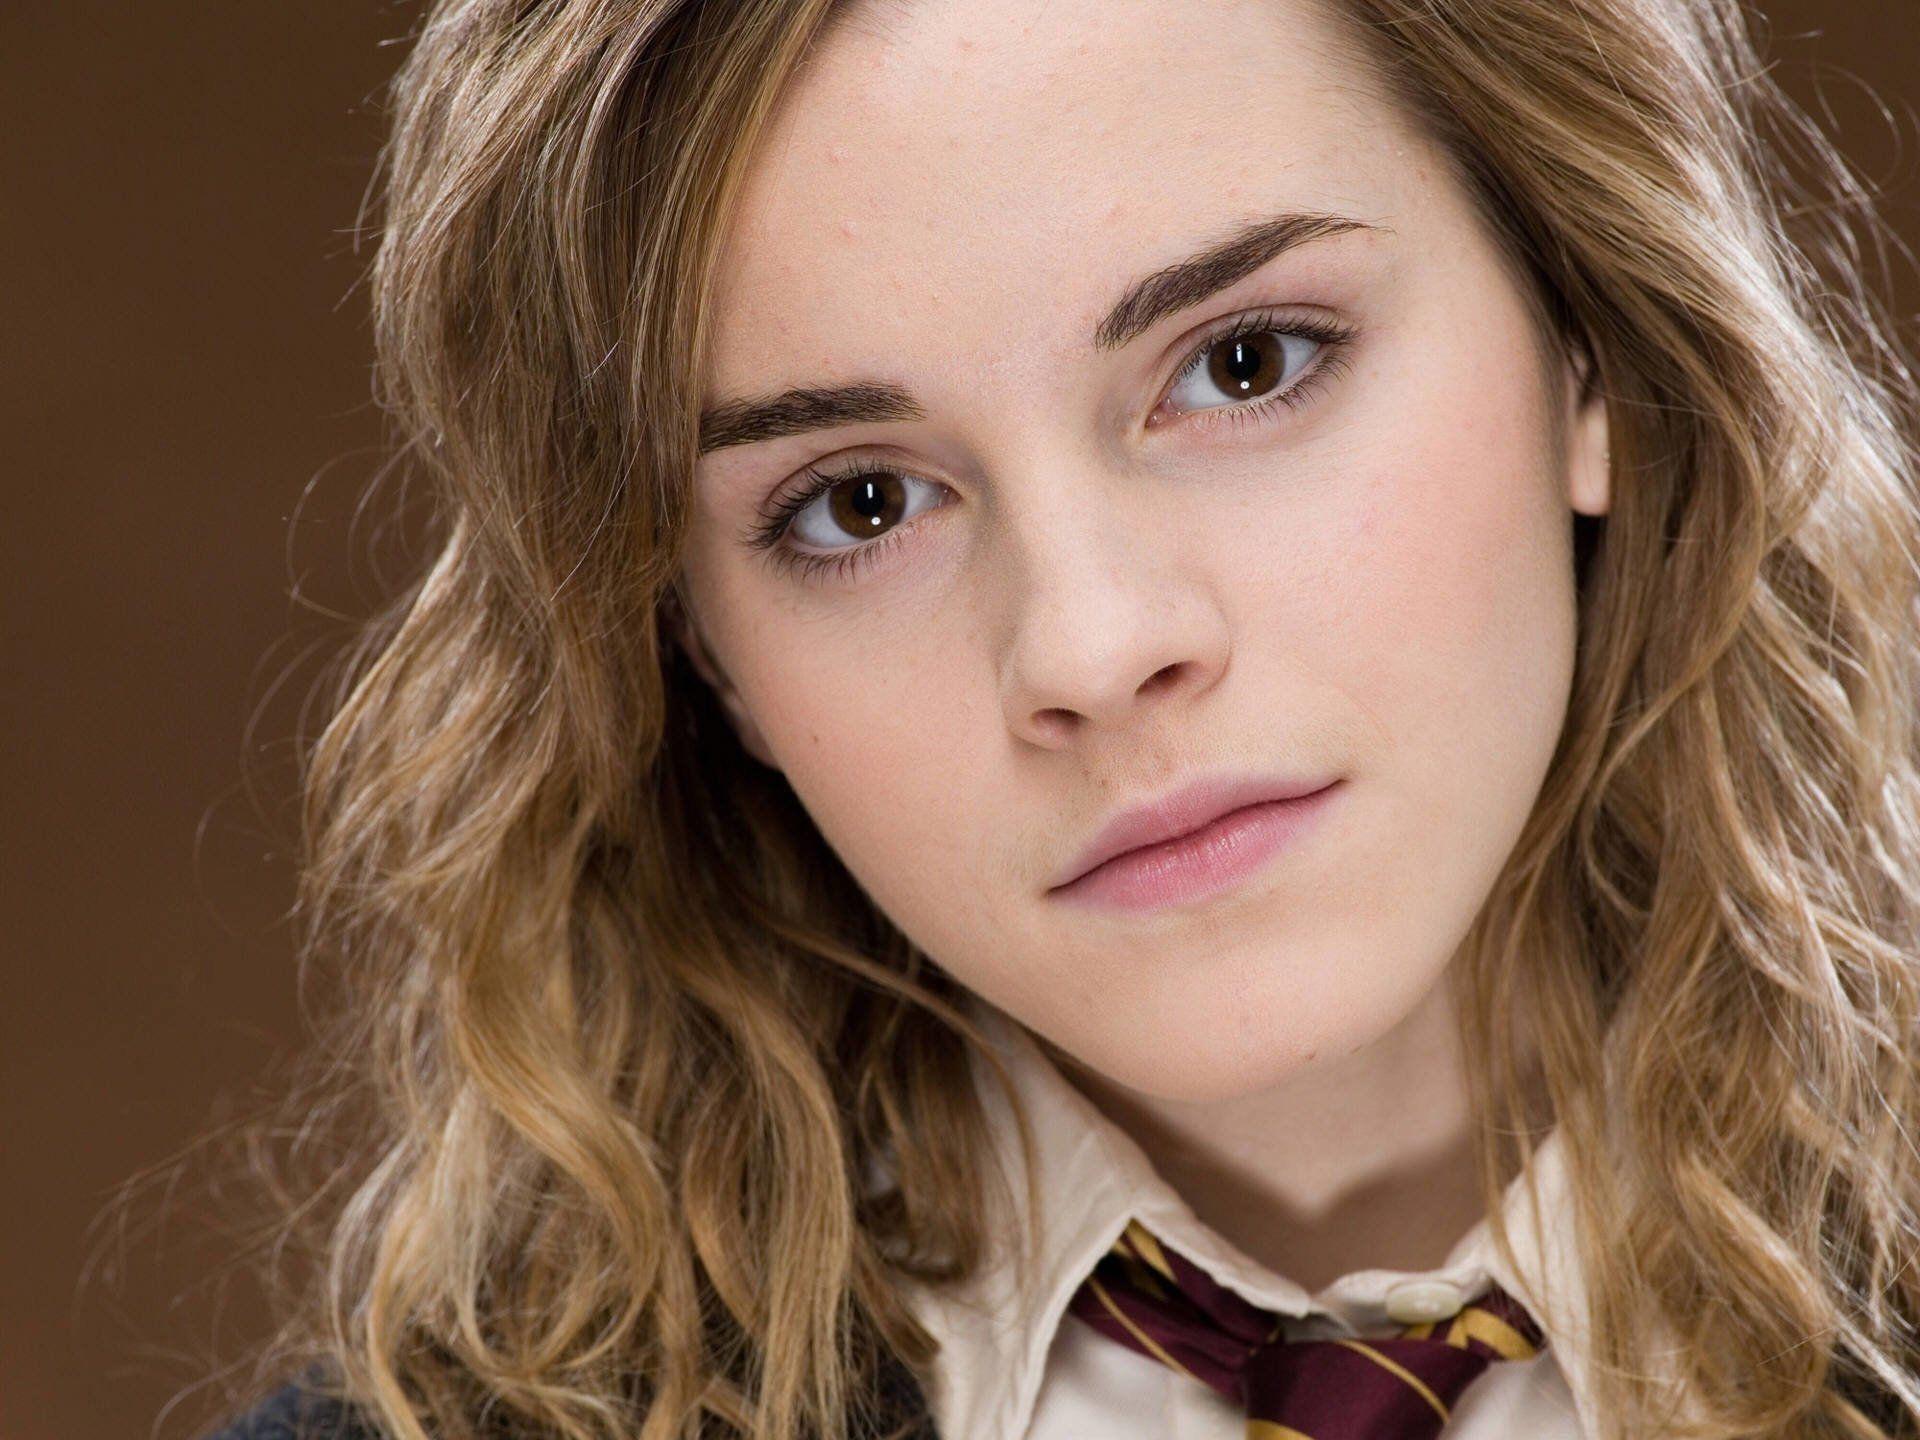 Hermione Granger image years later wallpaper and background. HD